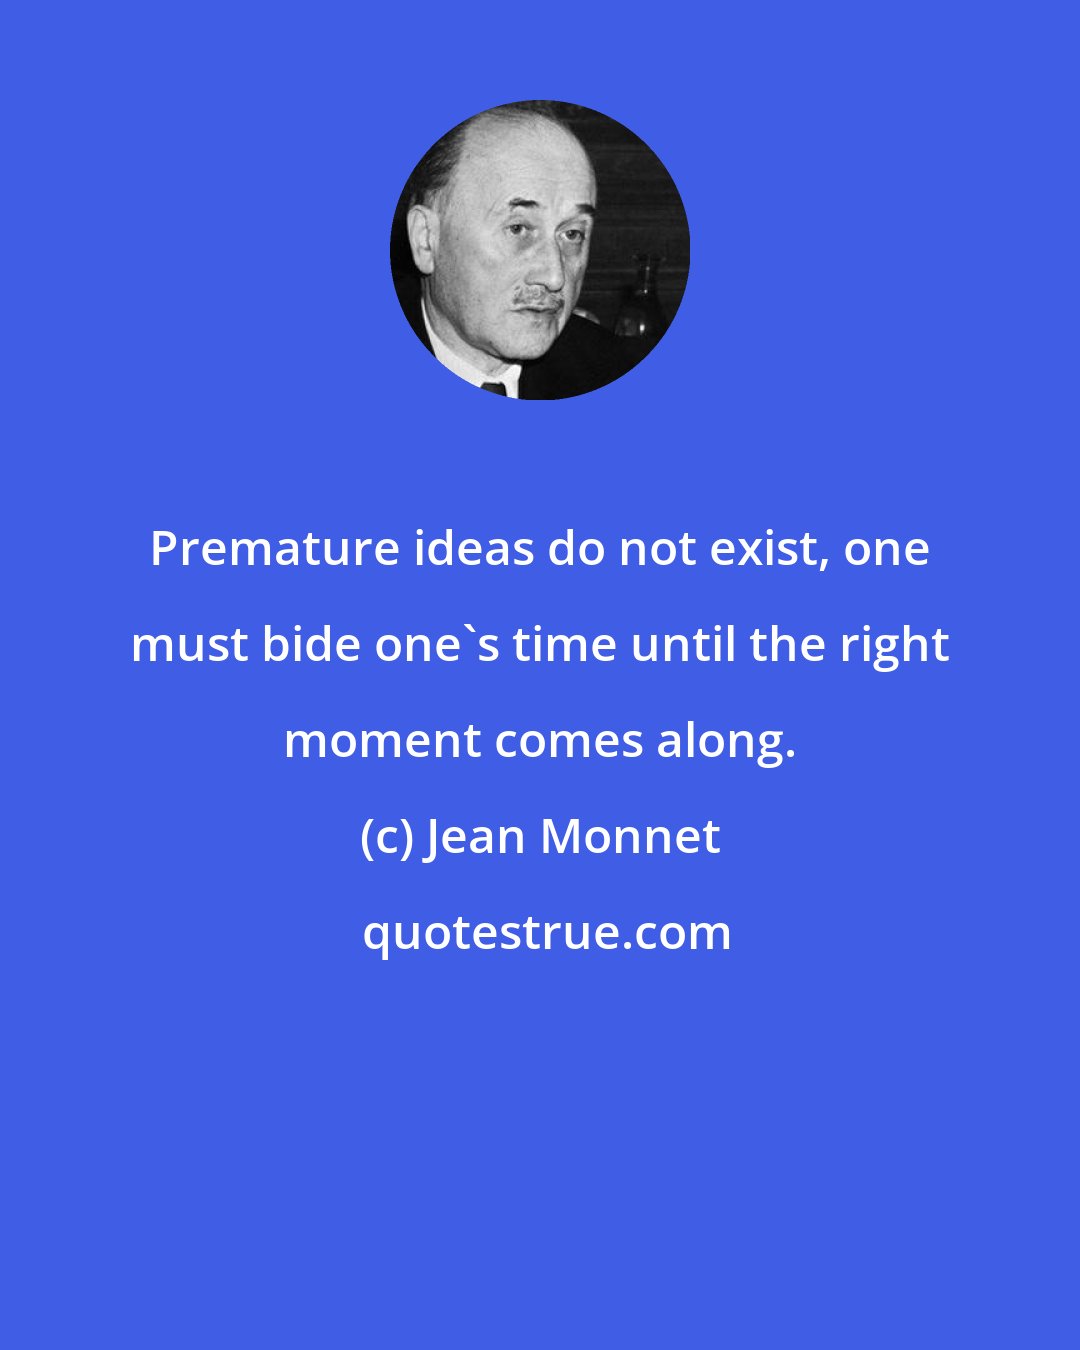 Jean Monnet: Premature ideas do not exist, one must bide one's time until the right moment comes along.